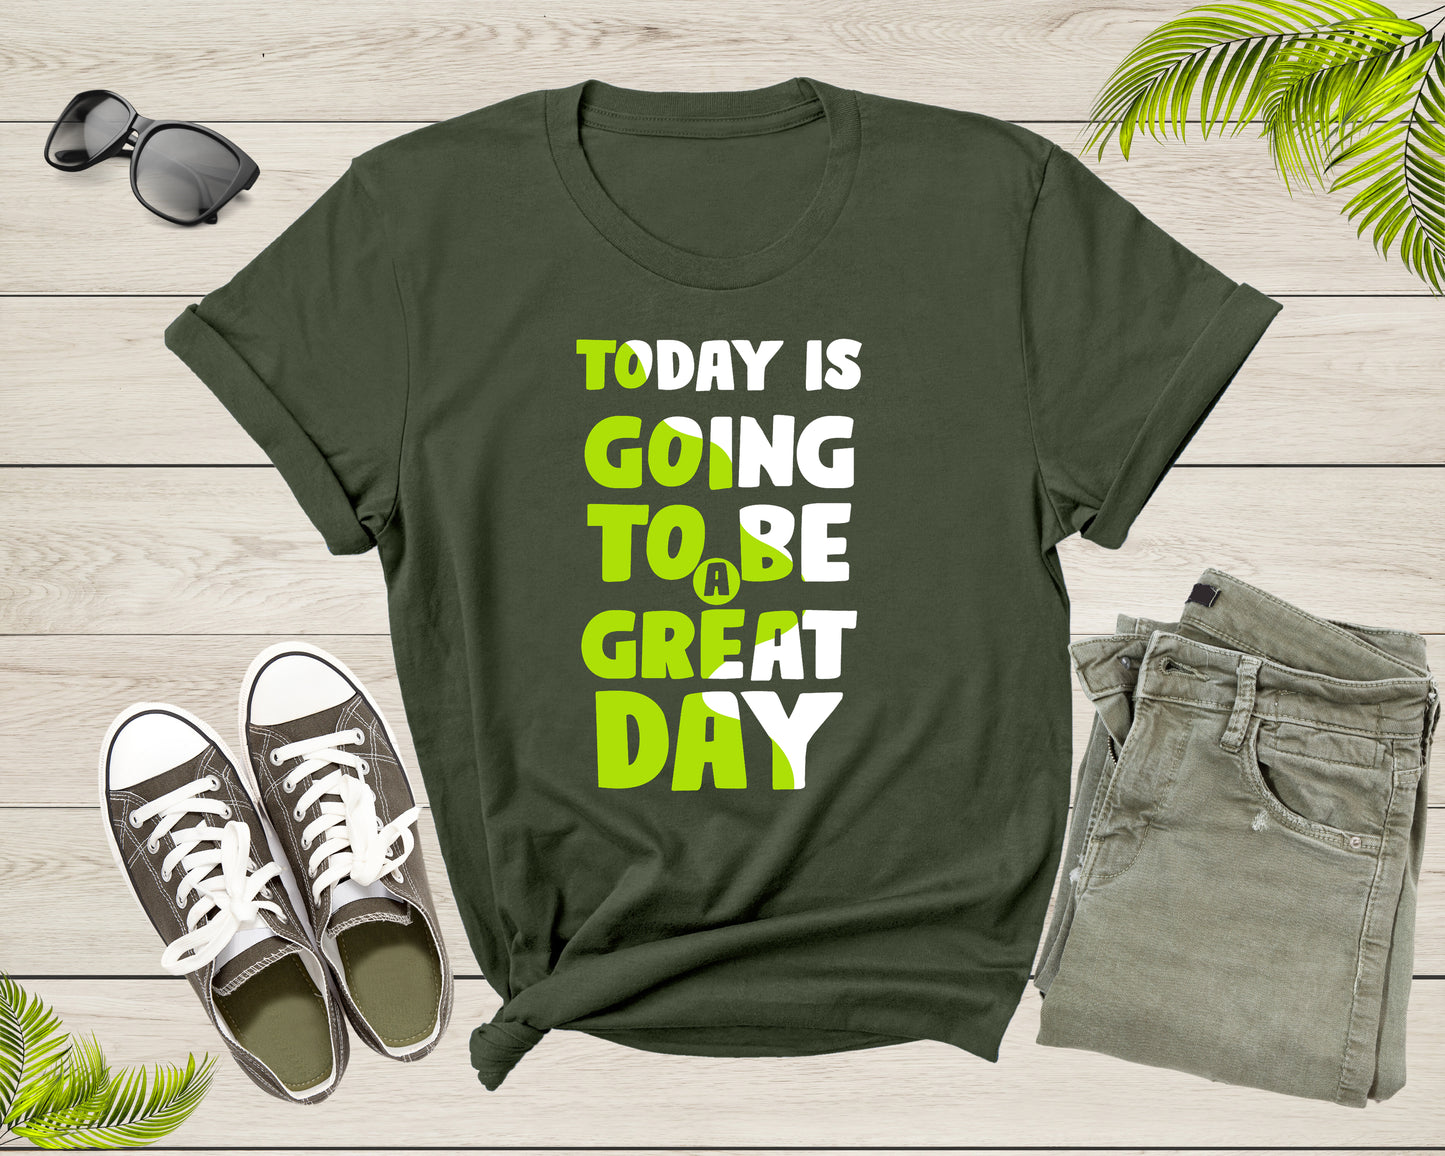 Today Is Going To Be A Great Day Motivational Slogan Text T-Shirt Cool Quote Lover Gift T Shirt for Men Women Kids Boys Girls Teens Tshirt